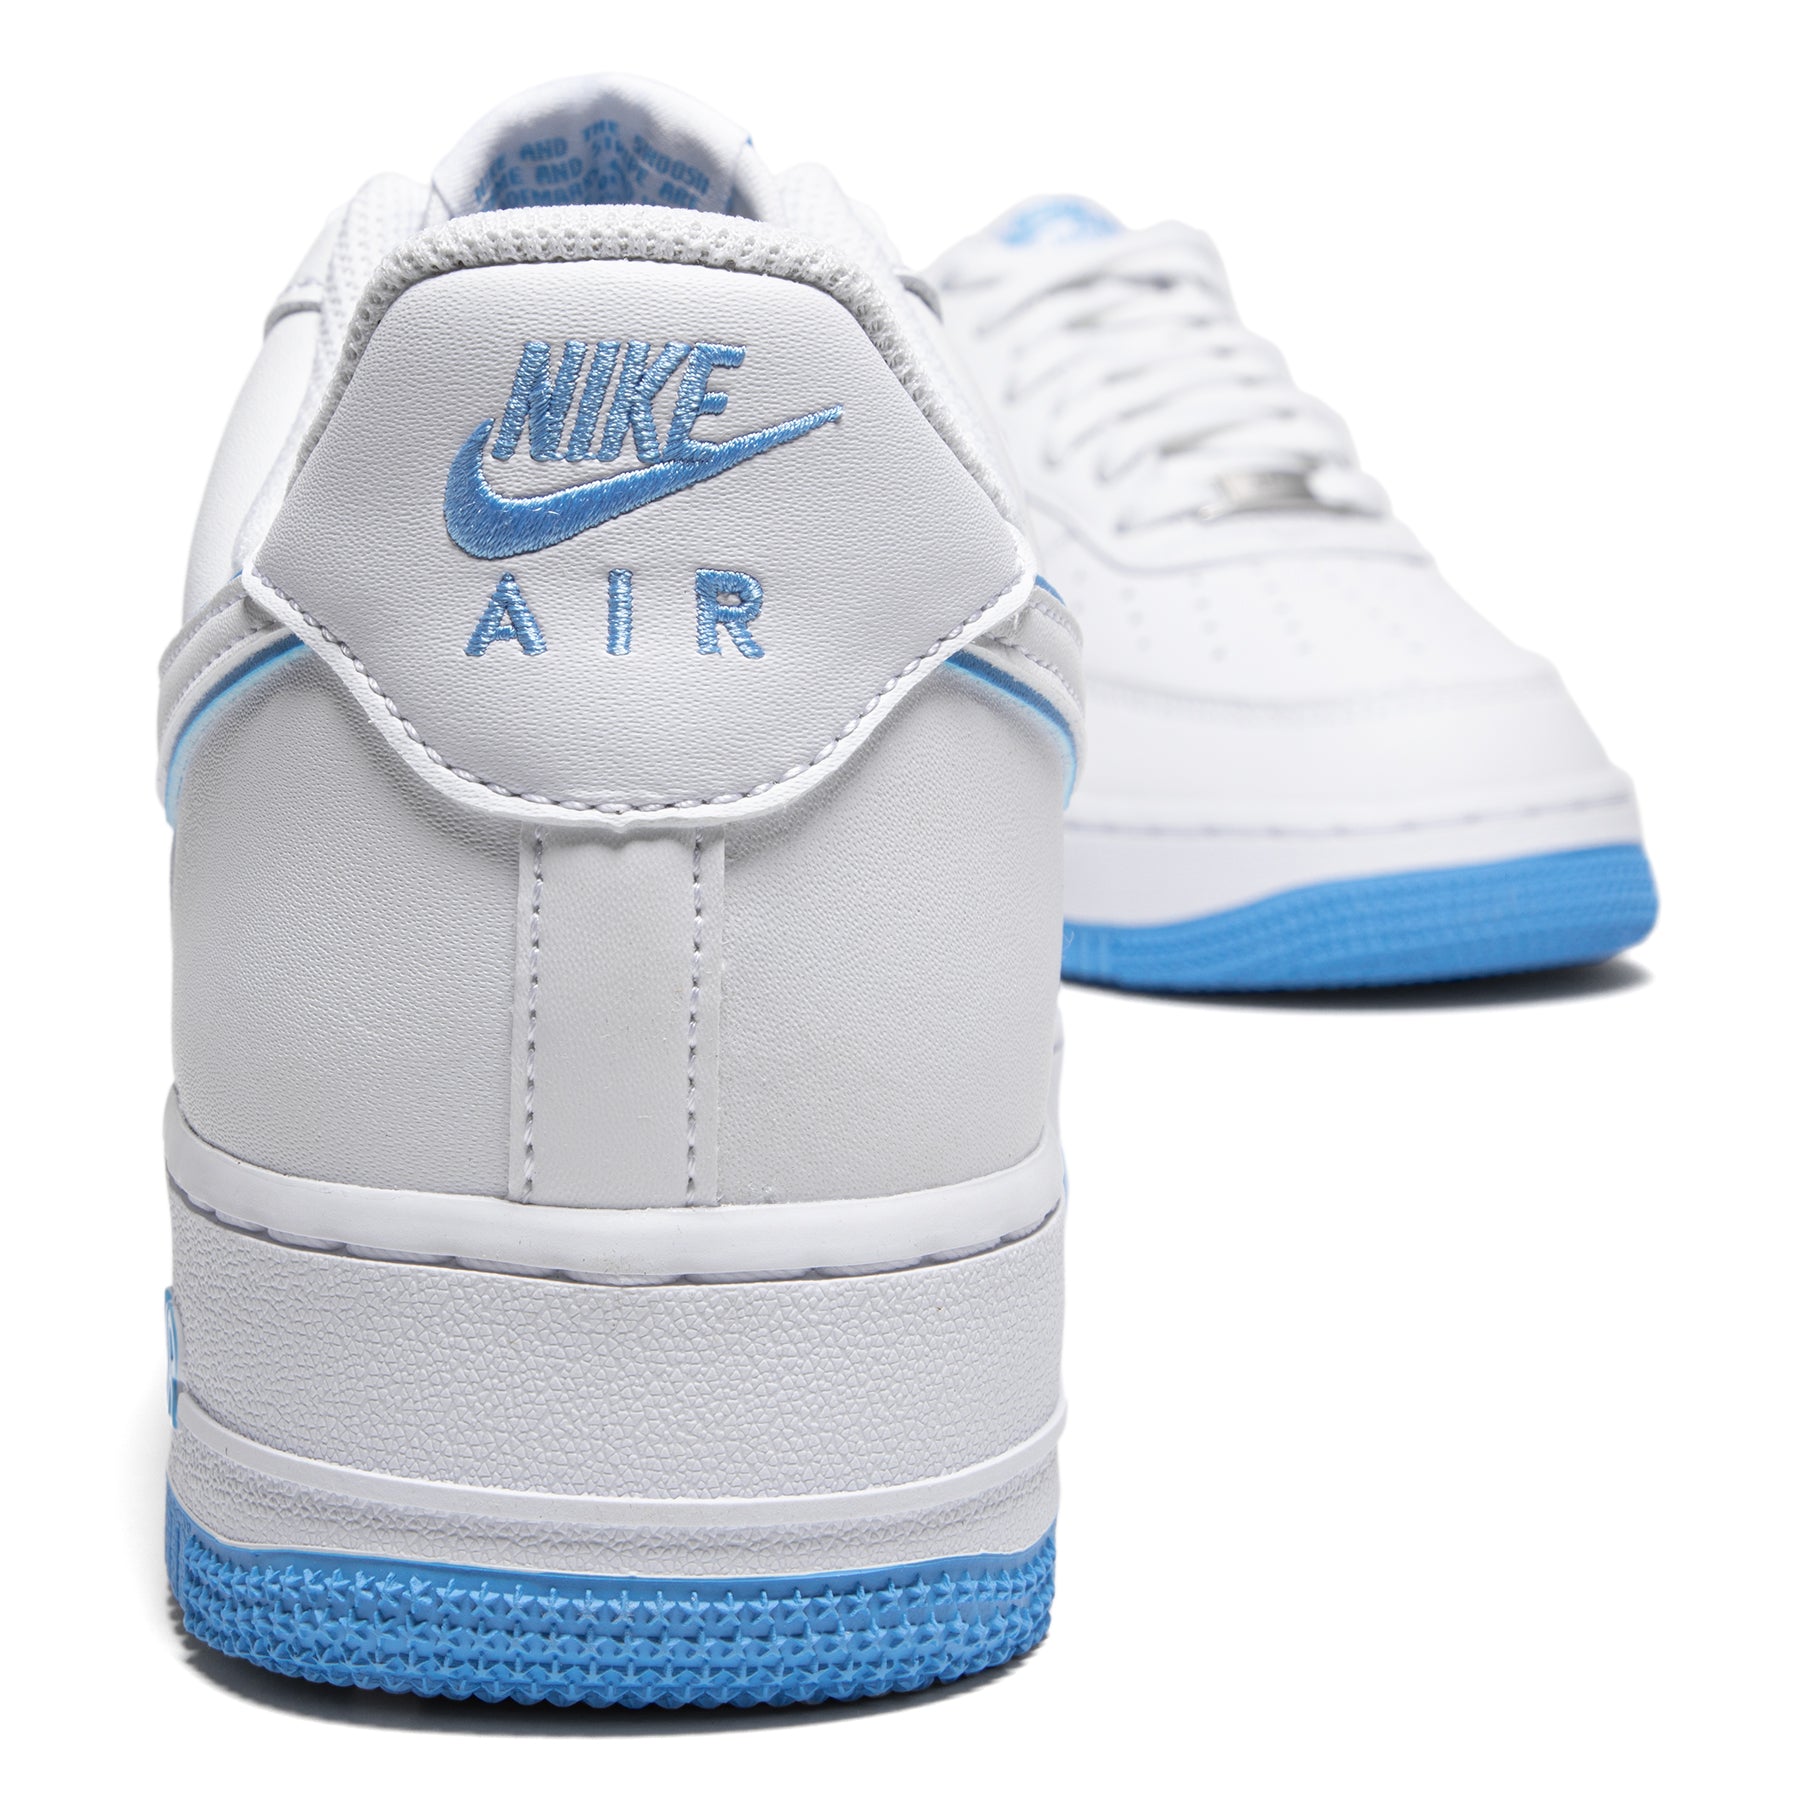 Nike Air Force 1 Low White University Blue DV0788-101 Release Date